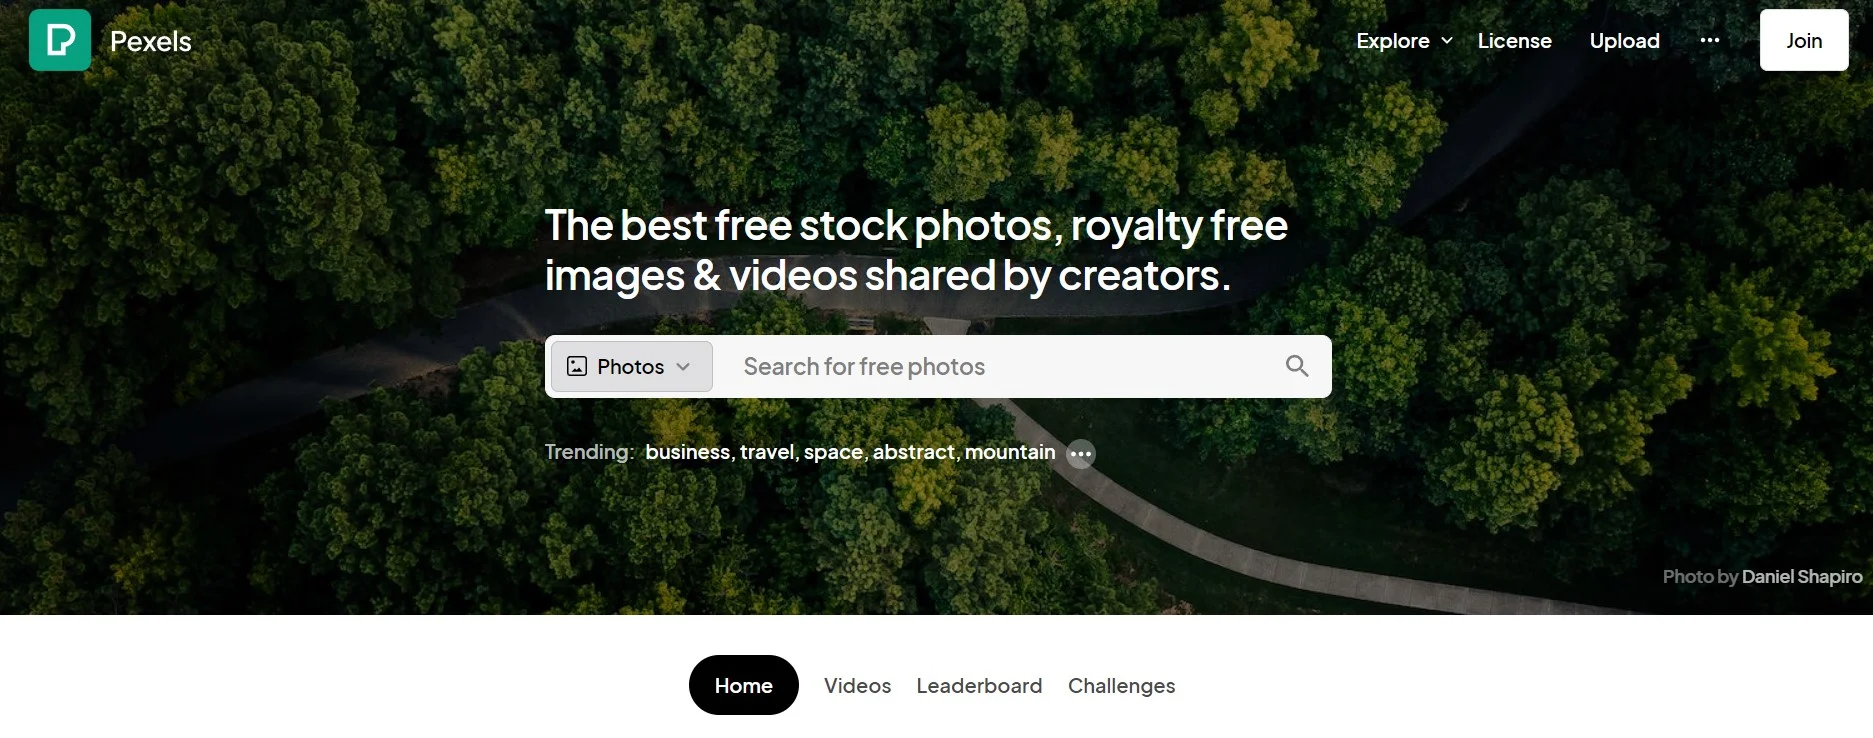 Pexels The best free stock photos, royalty free images & videos shared by creators